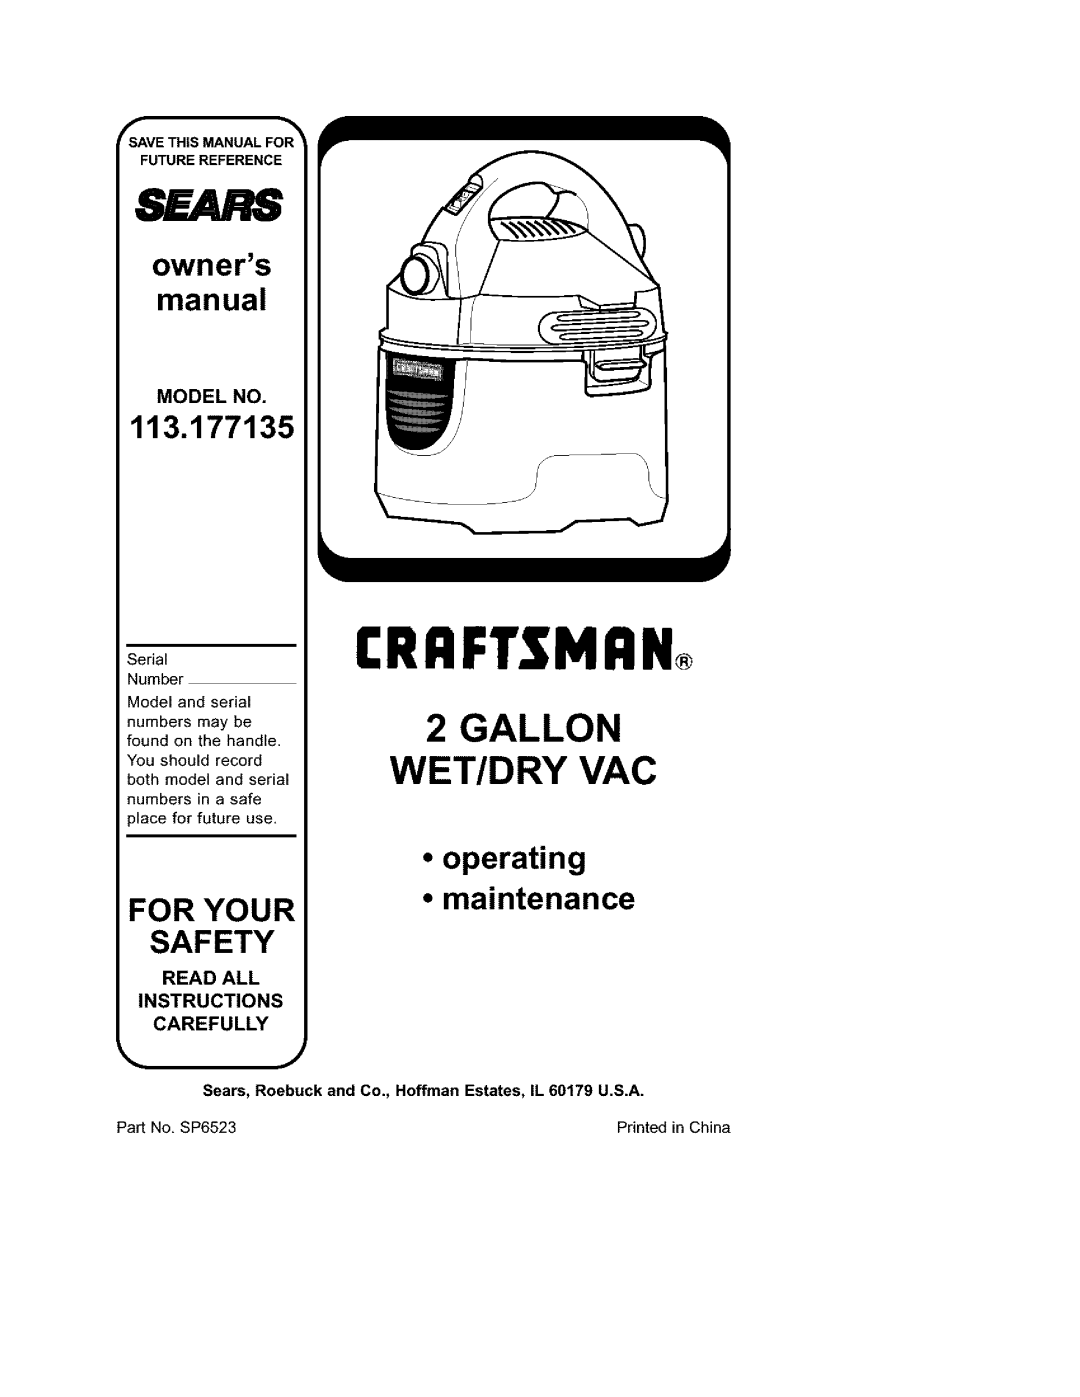 Craftsman 113.177135 owner manual Crrftsmrn, Gallon Wet/Dry Vac, Carefully, owners manual, operating, For Your, Safety 